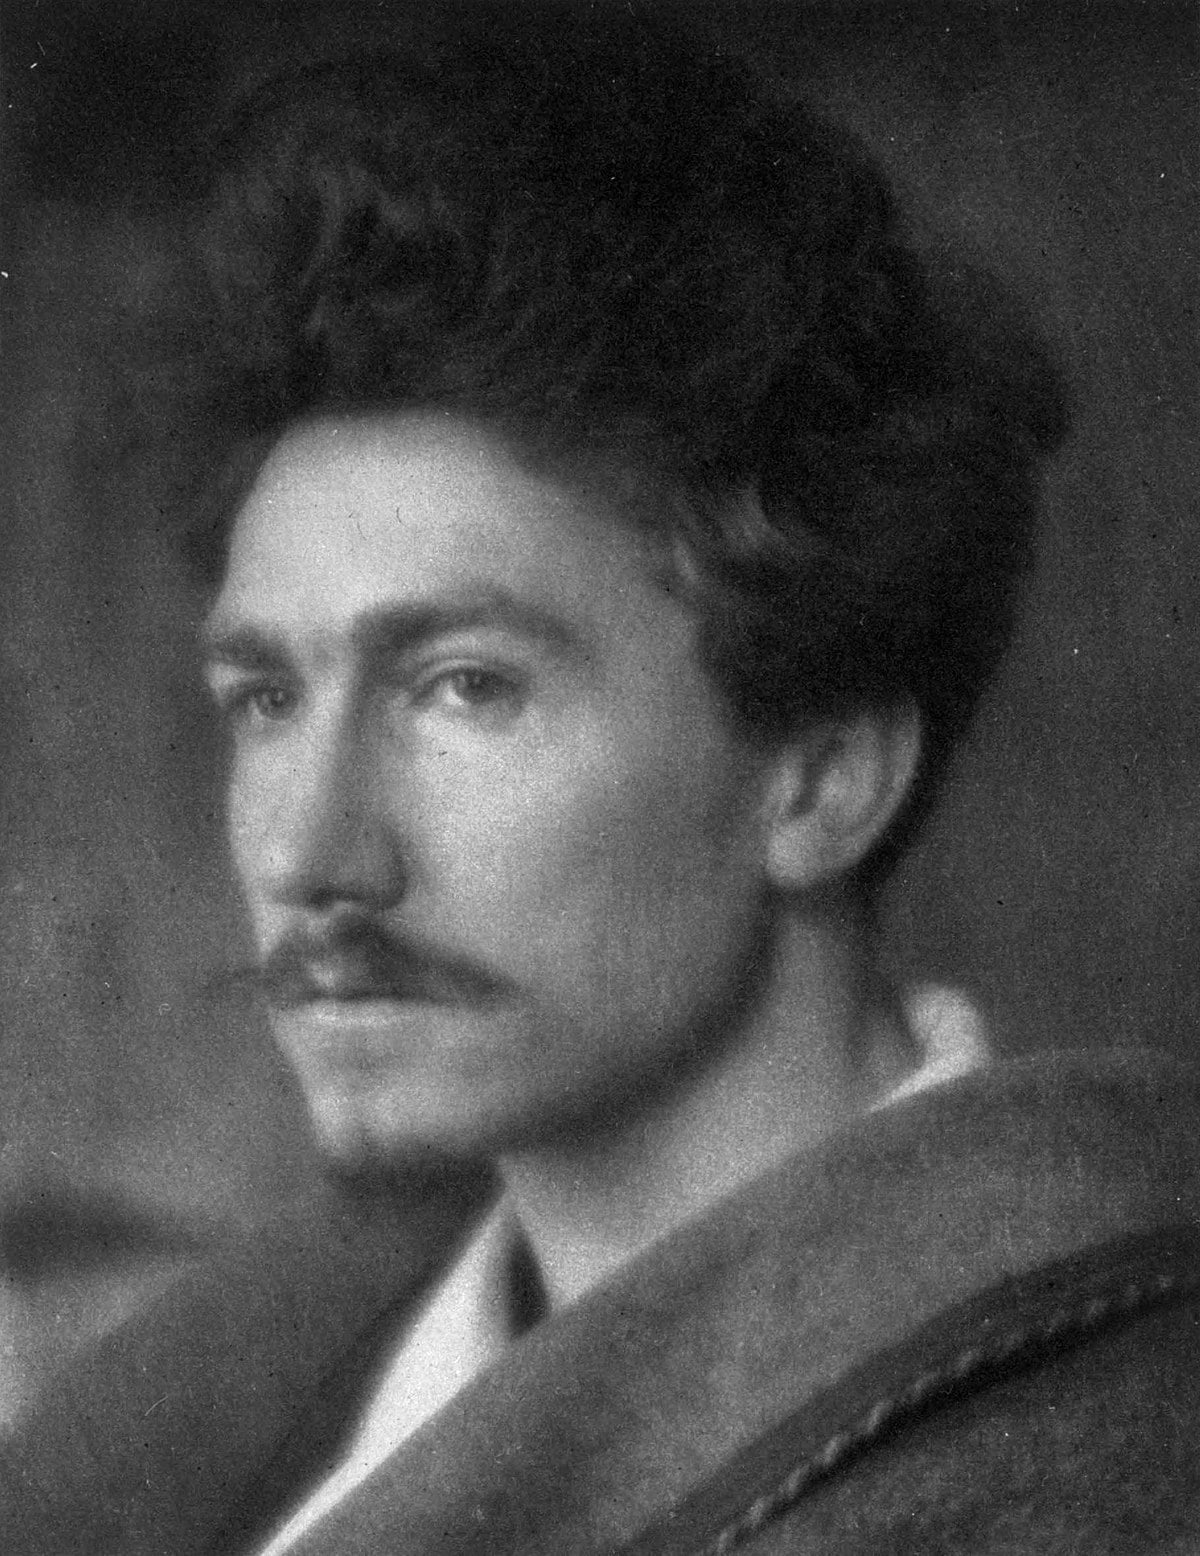 Rules for writing poetry by Ezra Pound